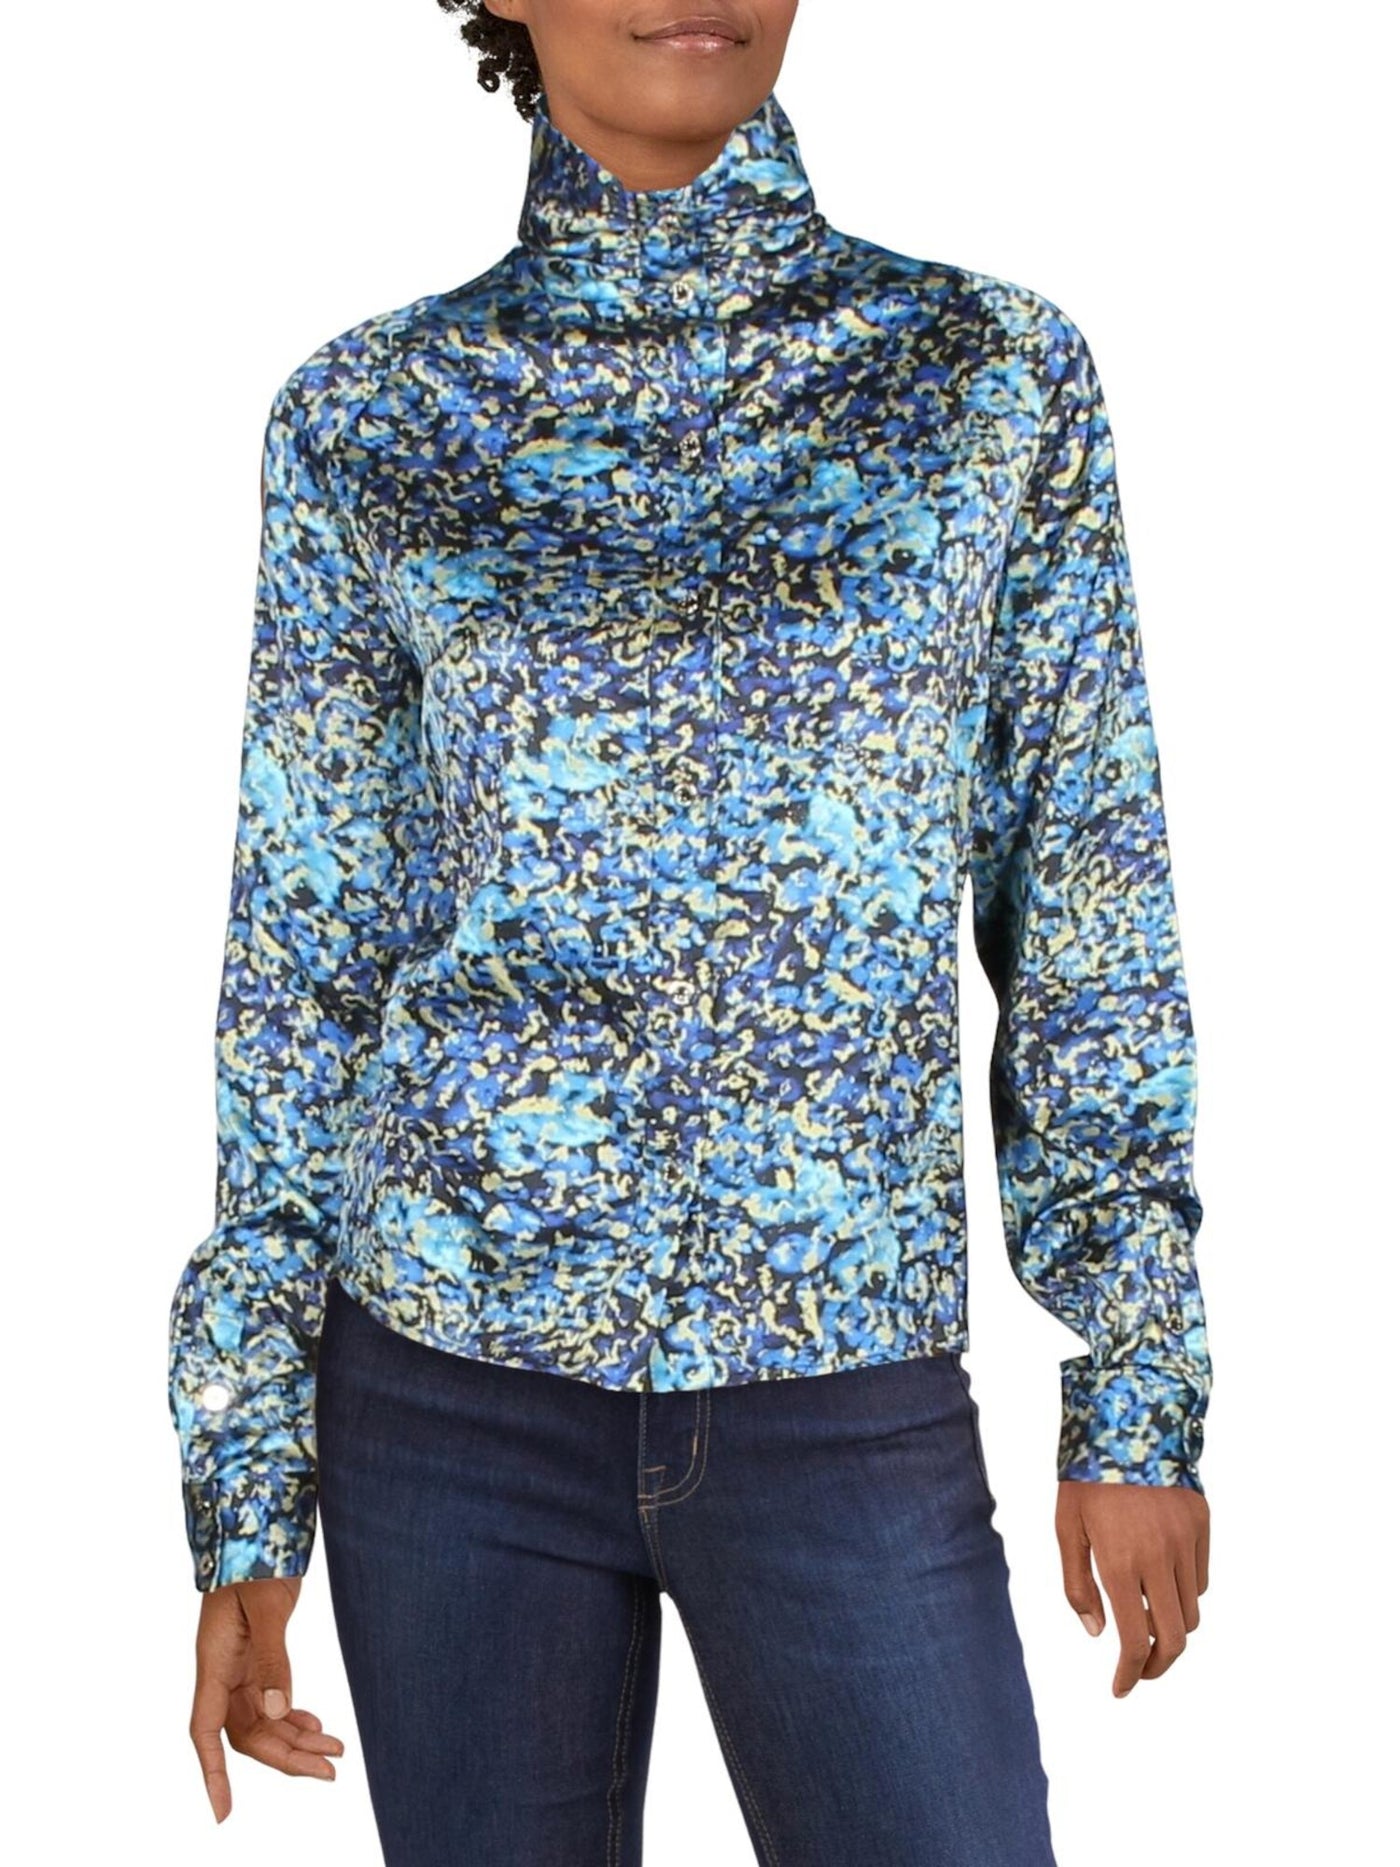 MARCIANO Womens Blue Printed Cuffed Sleeve Turtle Neck Button Up Top 44